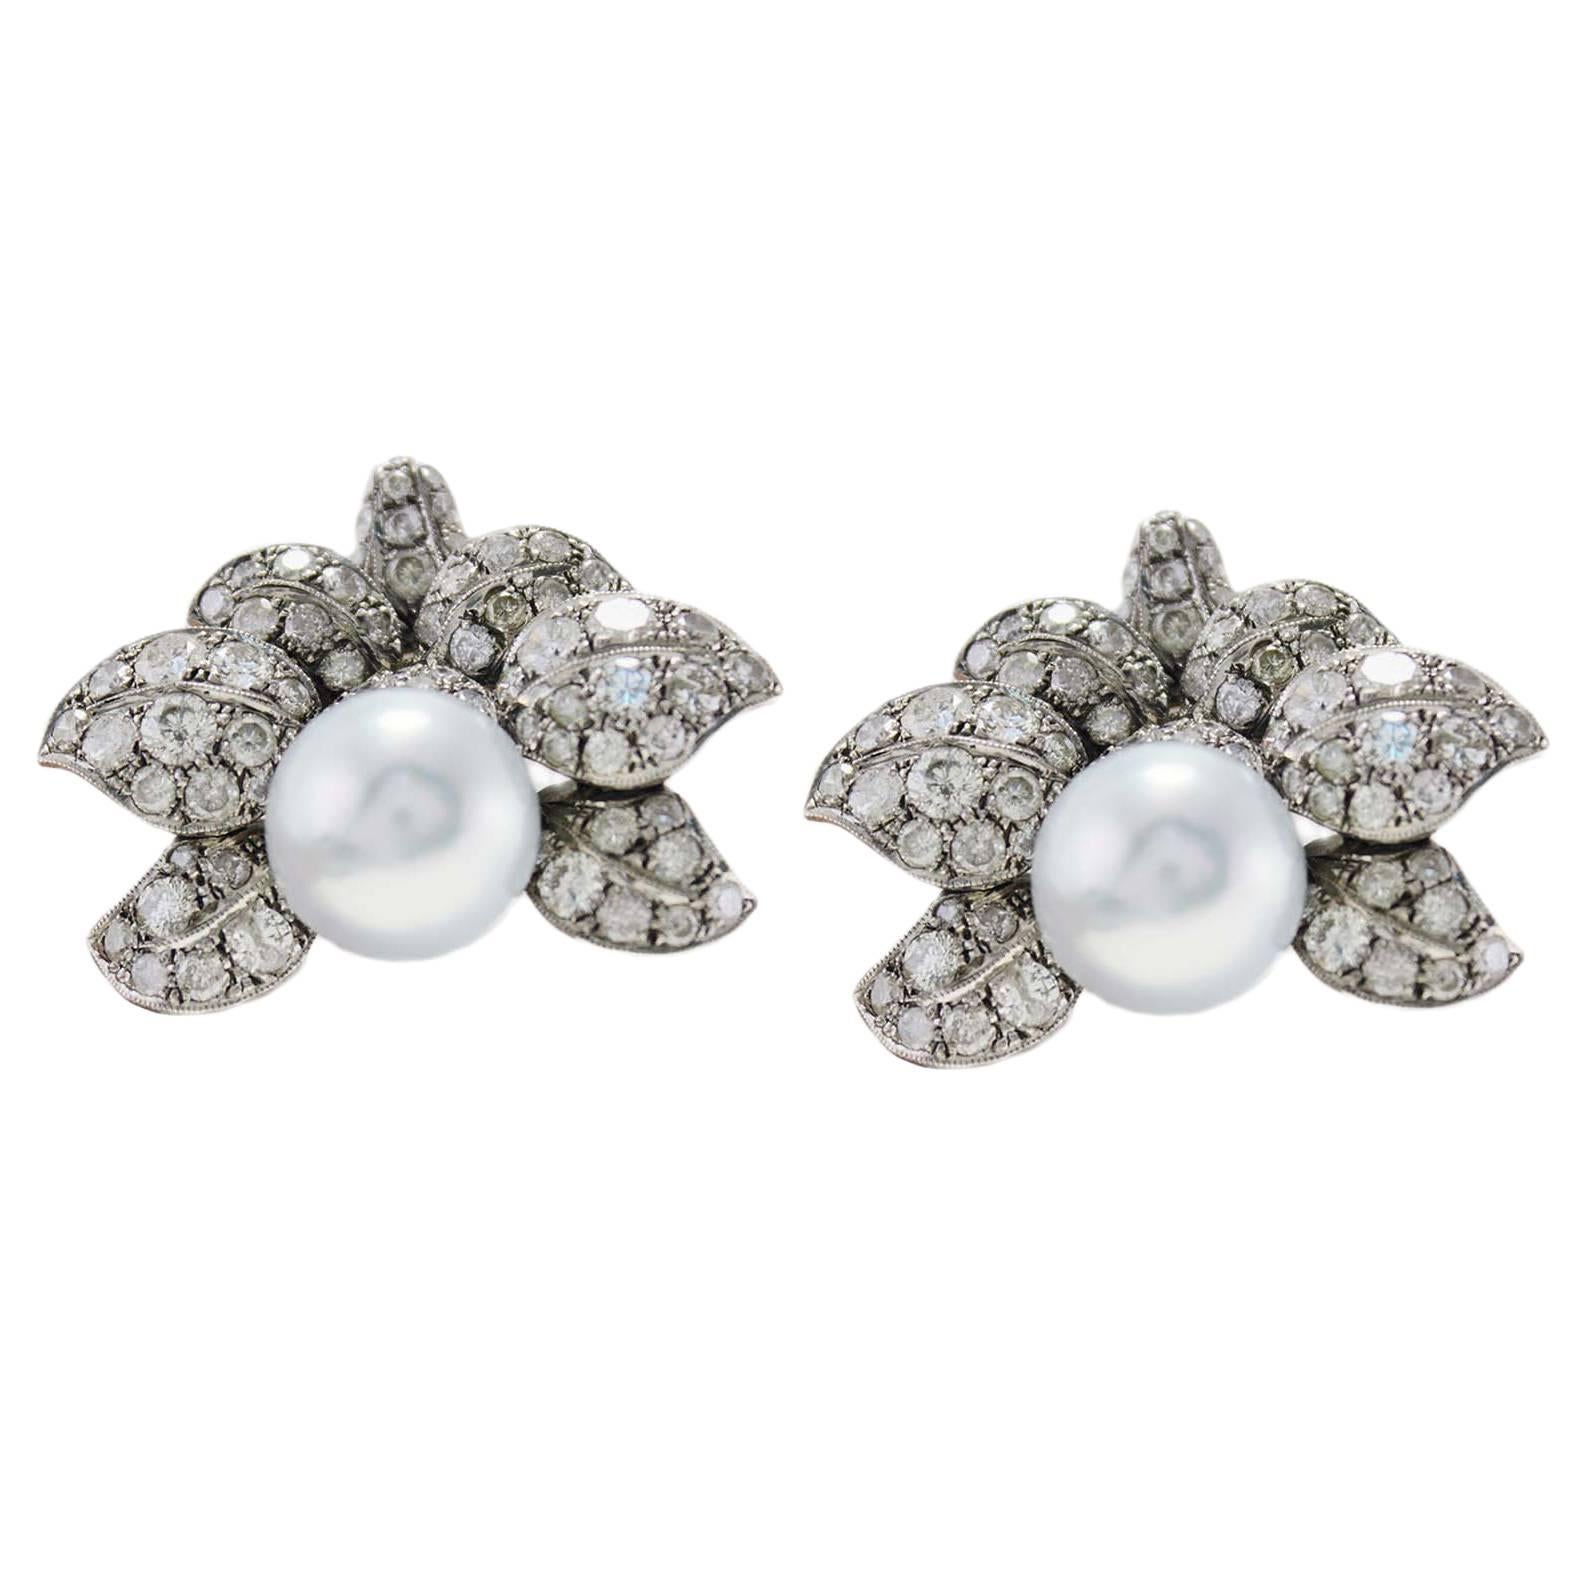 Ct 44 Australian Pearl and Ct 13 Diamonds Rose Gold and Silver Leaf Earrings For Sale